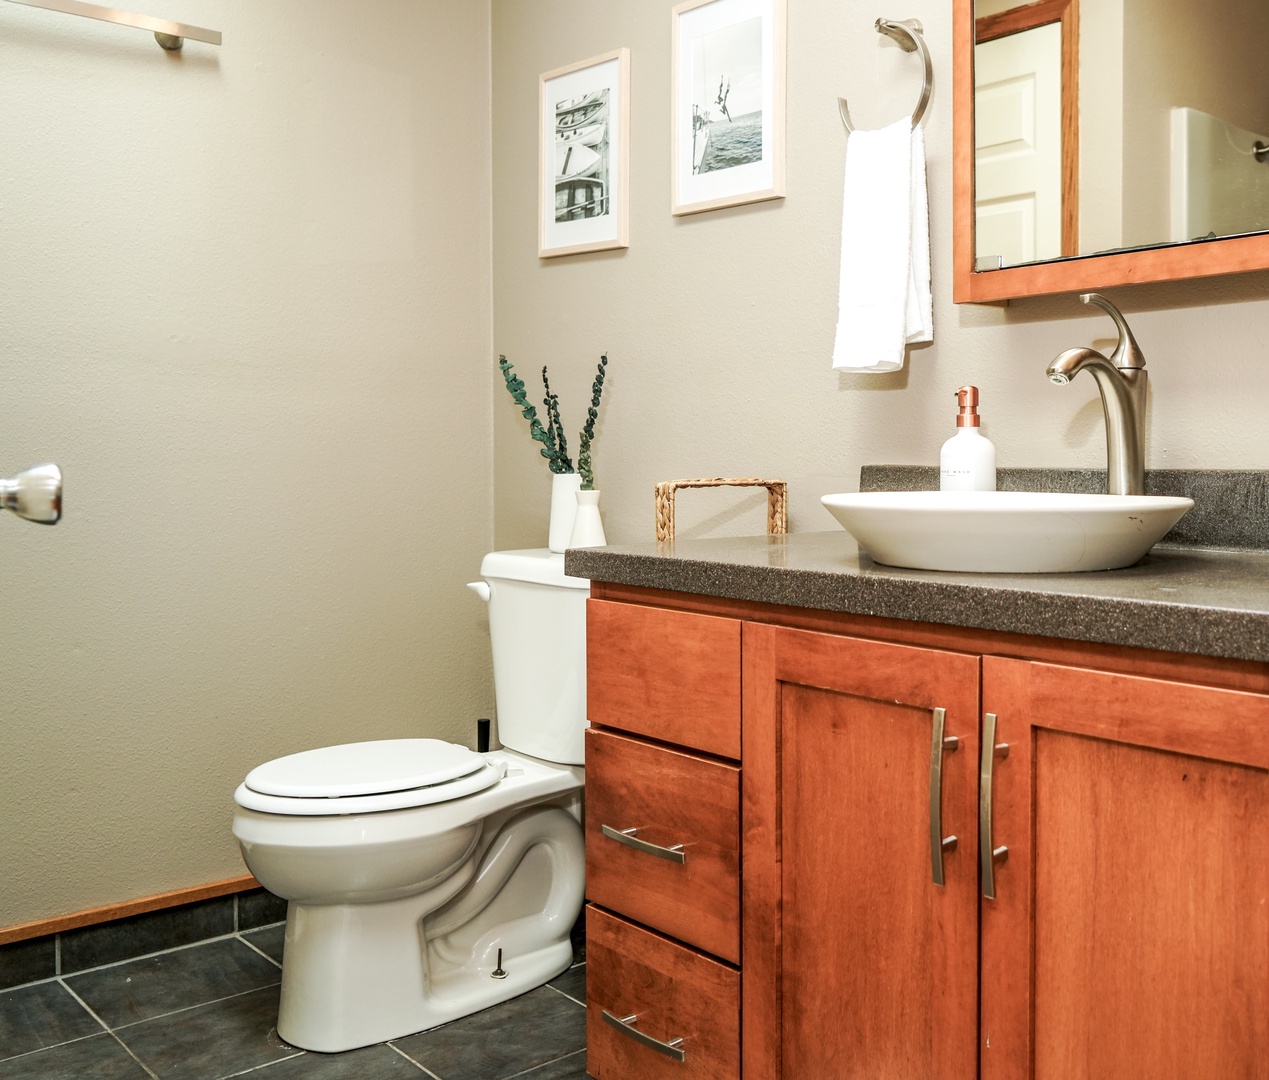 The shared bathroom includes a single vanity & shower/tub combo